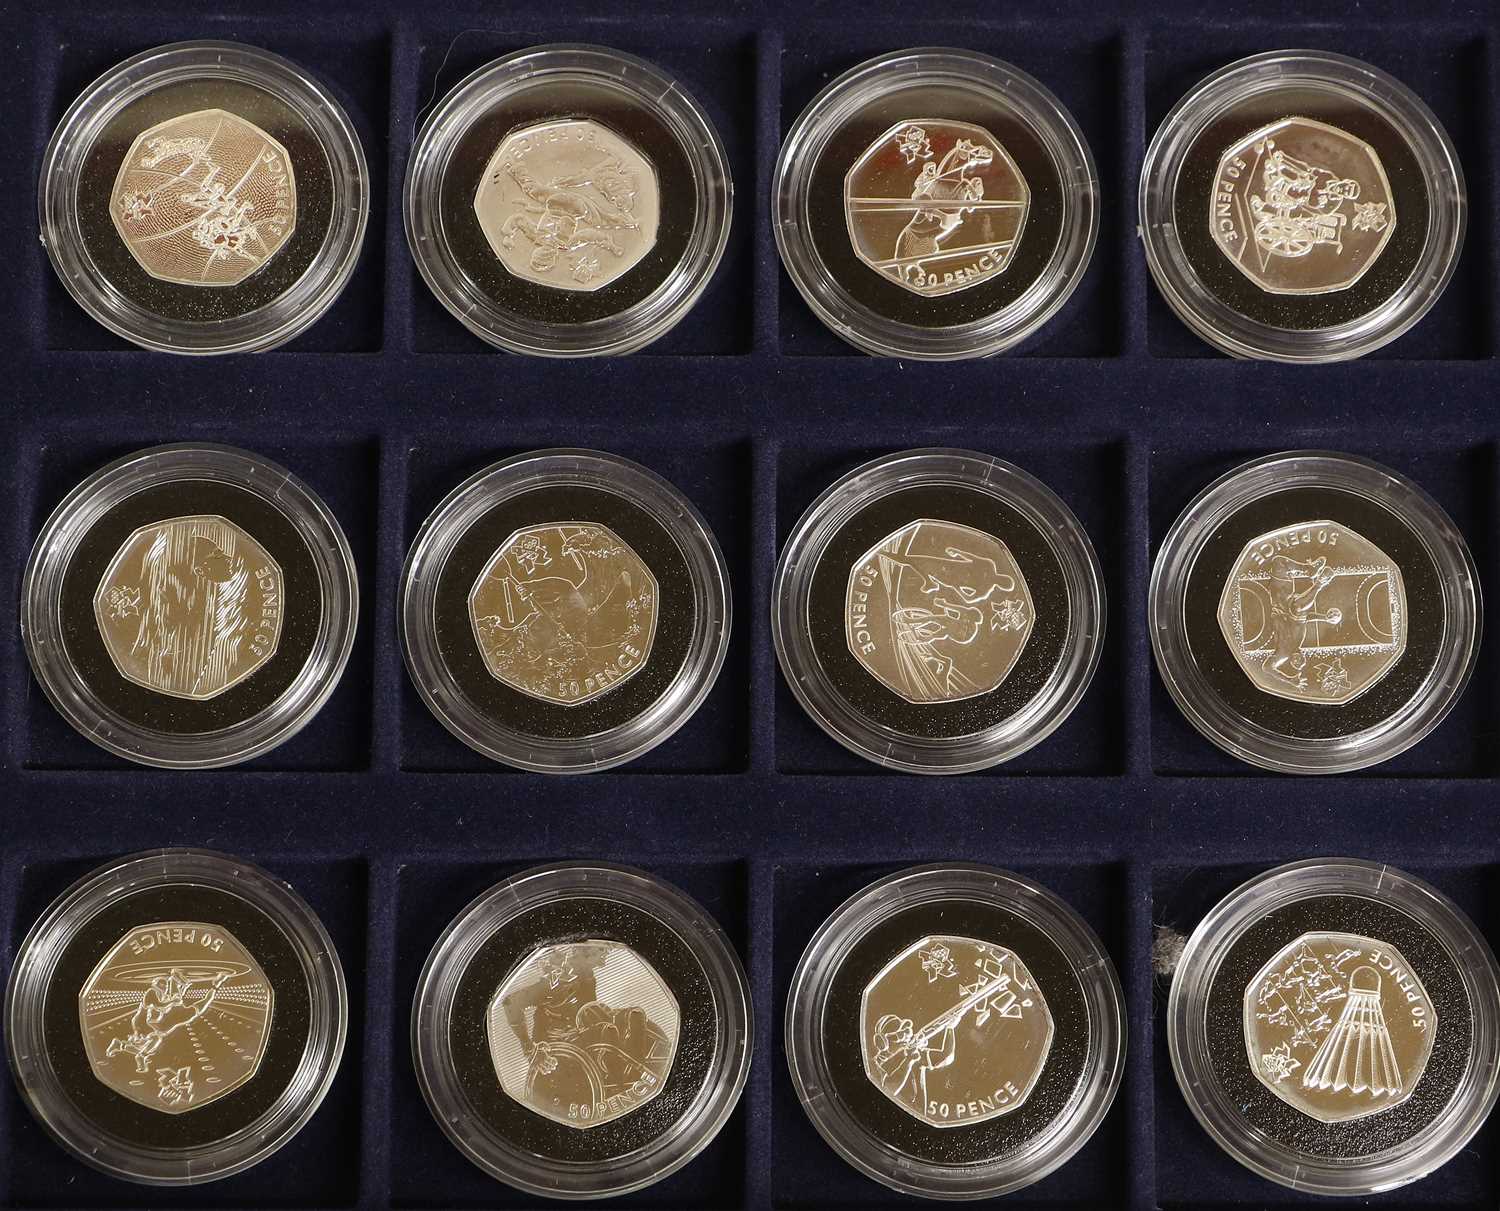 London 2012 Sports Collection, the complete set of 29 x sterling silver 50p coins, issued to - Image 3 of 6